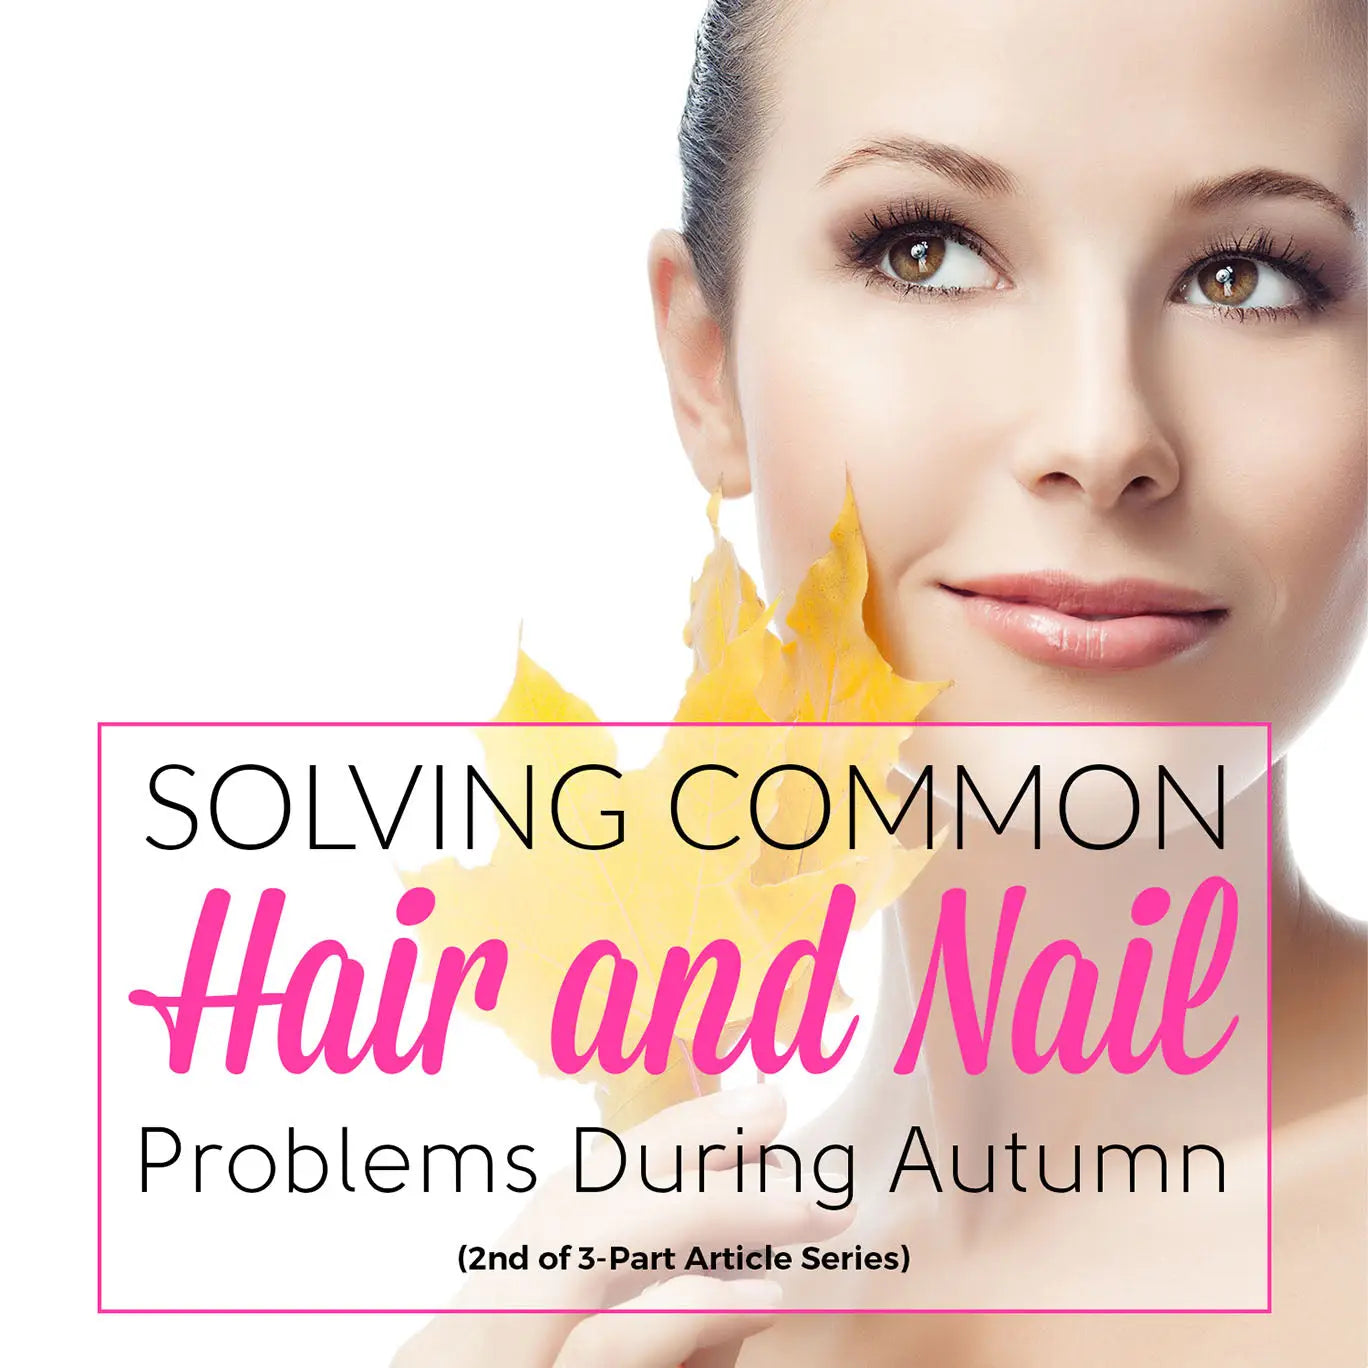 SOLVING COMMON HAIR AND NAIL PROBLEMS DURING AUTUMN